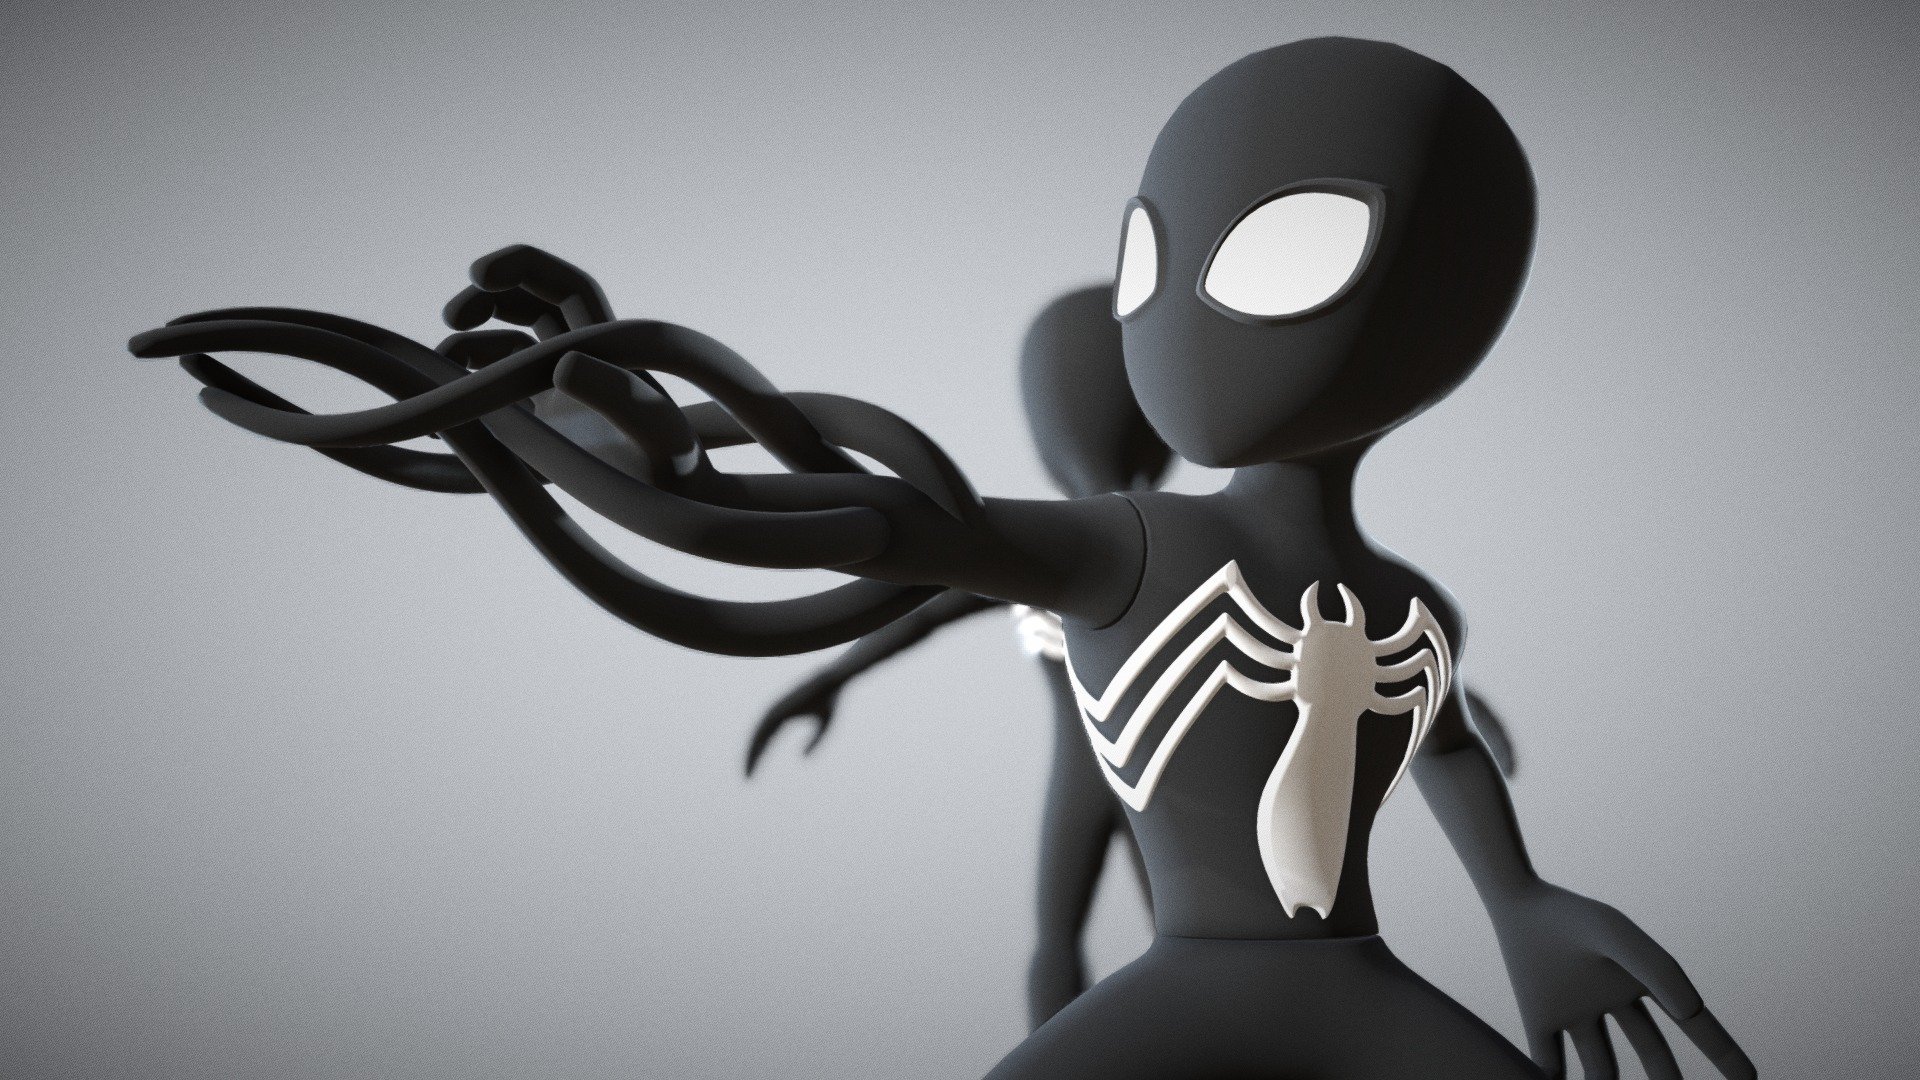 Marvel series n1. Symbiote Spider-Man

3D printable model of Symbiote Spider-Man. Includes rigged model for animators. 

Purchased version includes:

1) 3D printable model:




Splitted model: sliced and keyed pieces ready for printing

Full model: full body and support base

customizable arm: &ldquo;classic